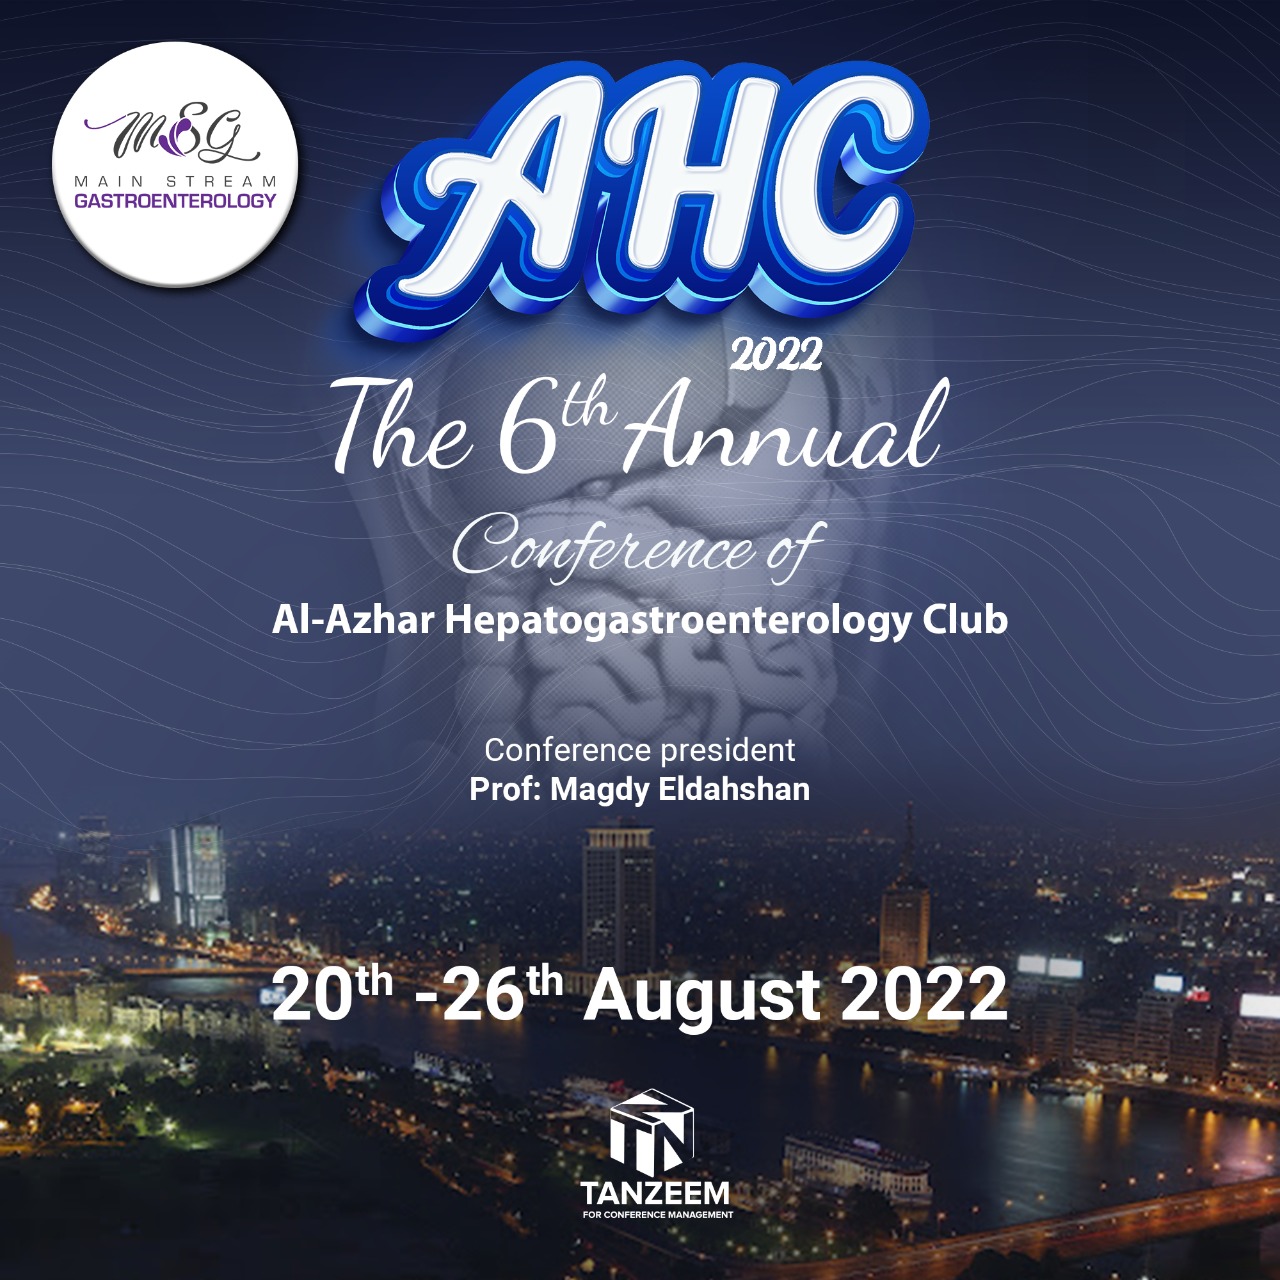 AHC 2022 The 6th Annual Conference of Al Azhar Hepatogastroenterology Club